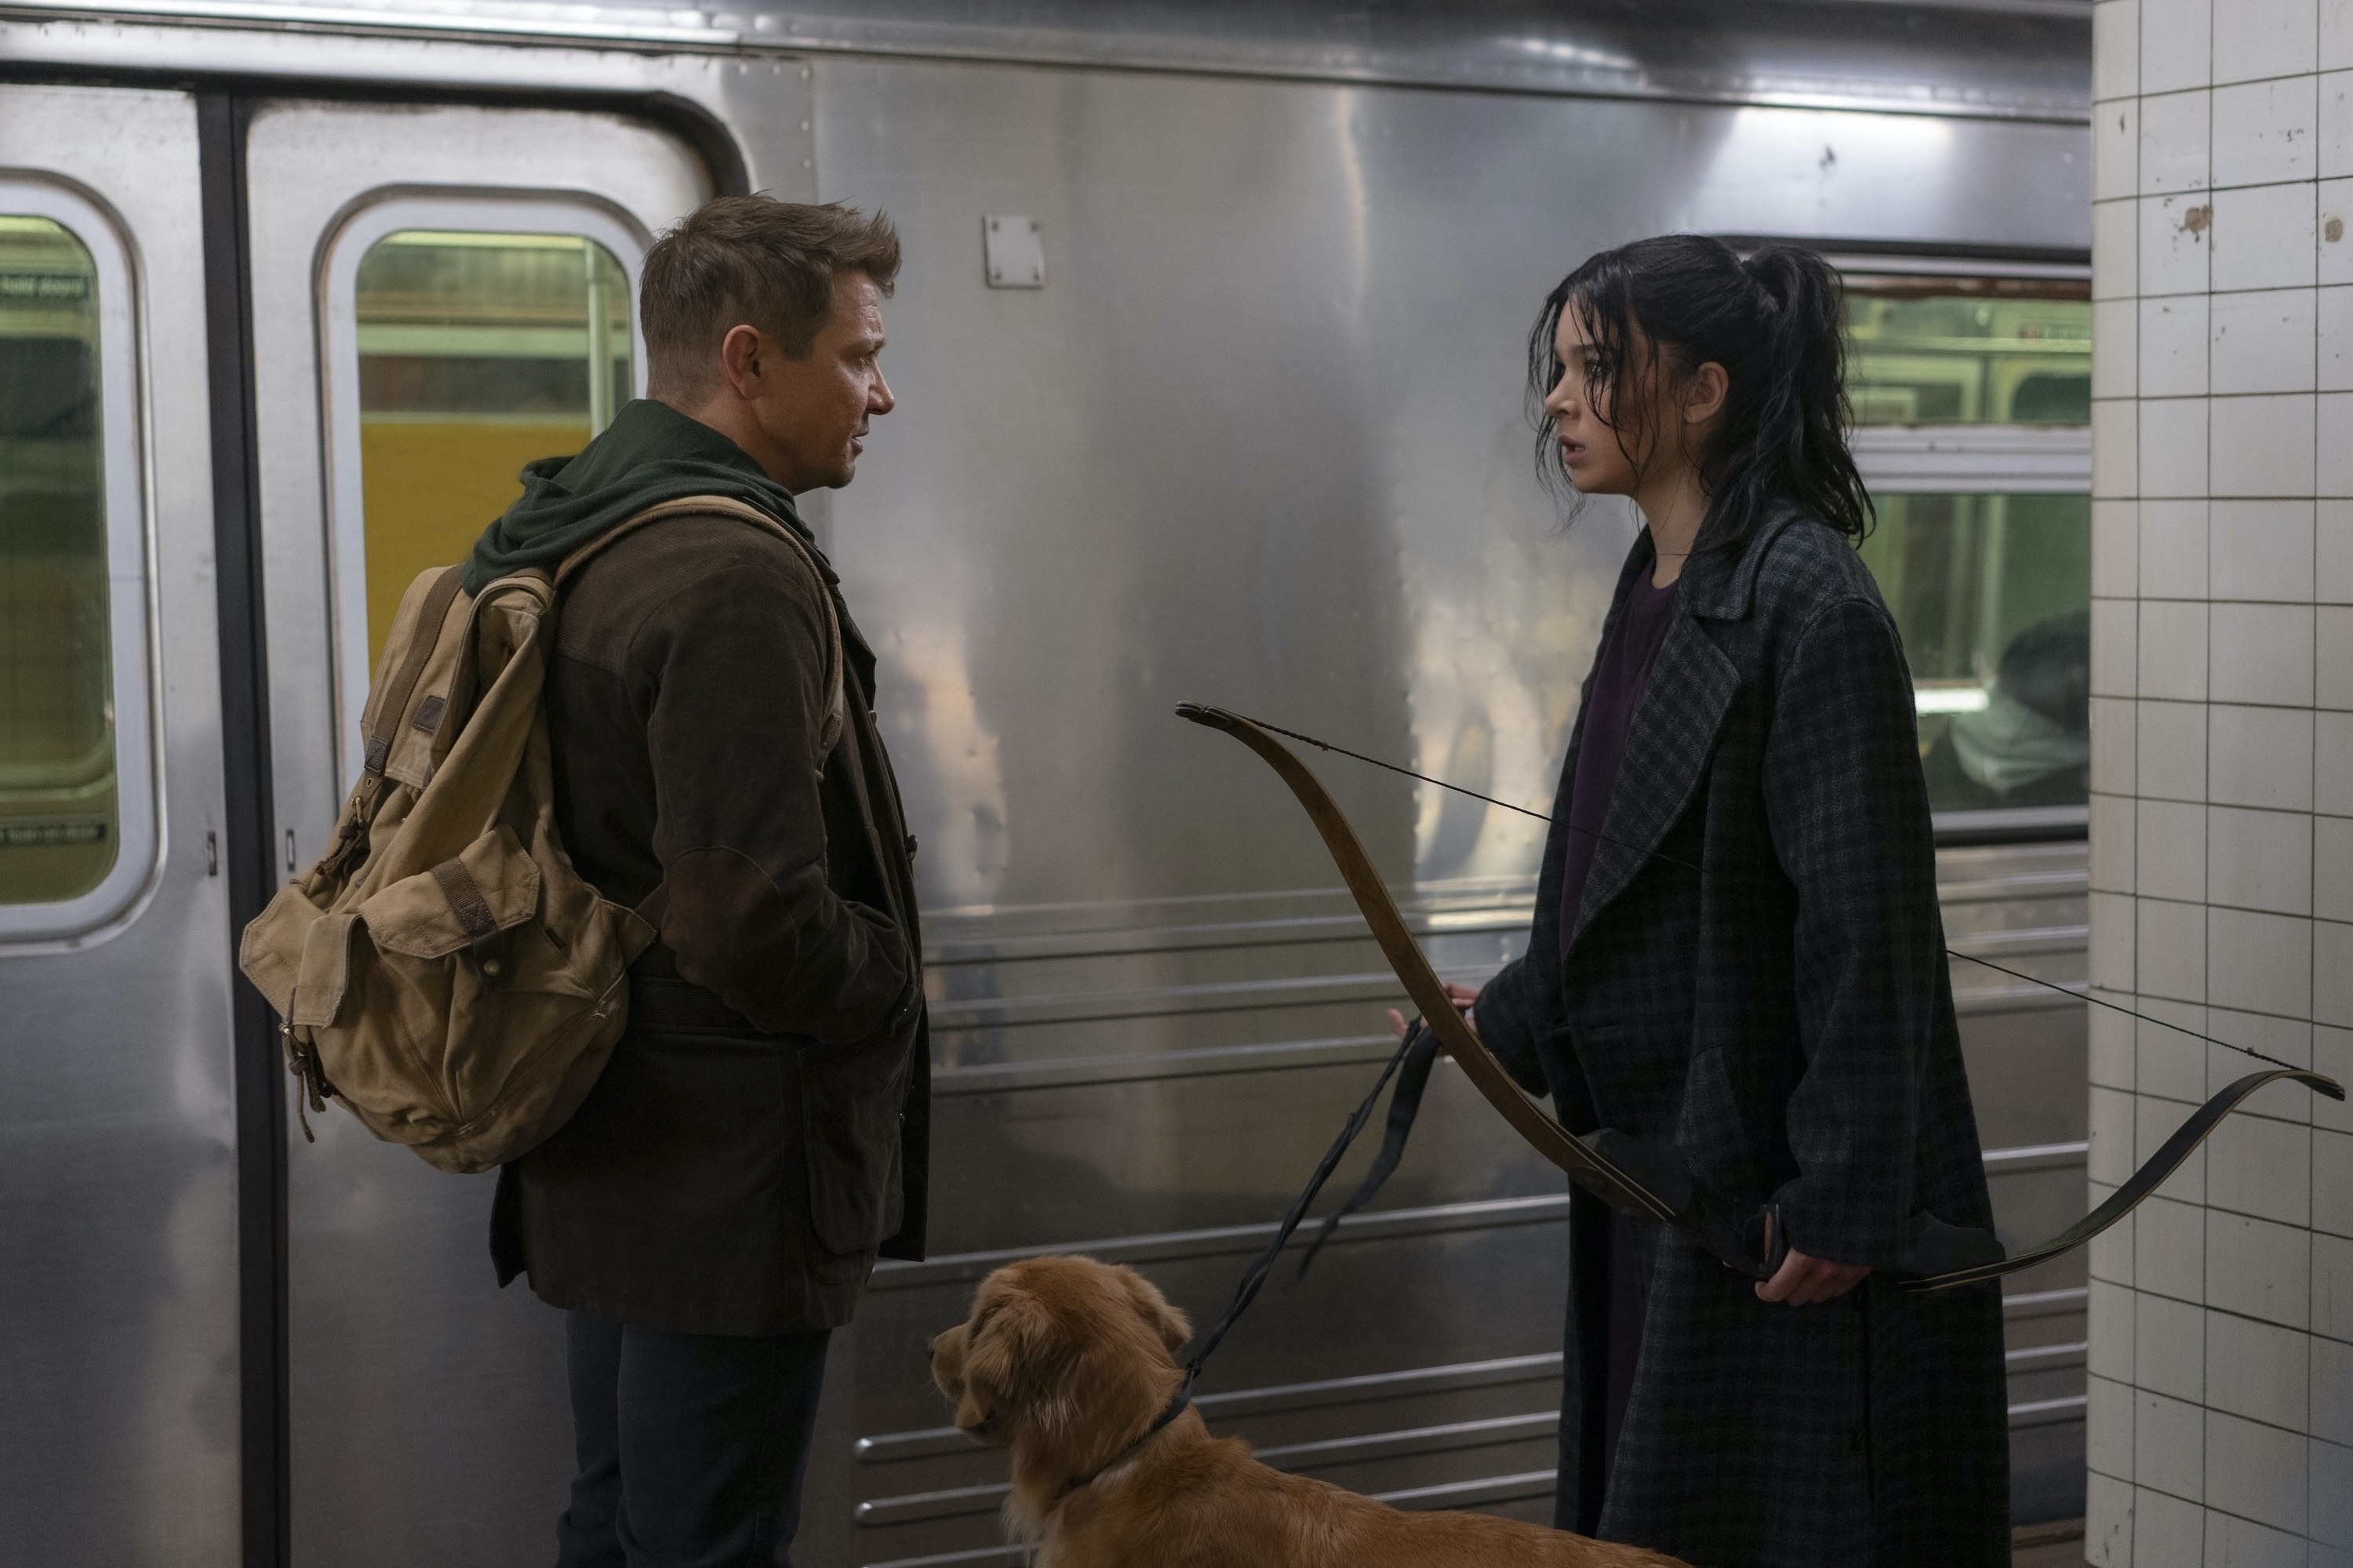 Jeremy Renner and Hailee Steinfeld stand on a subway platform